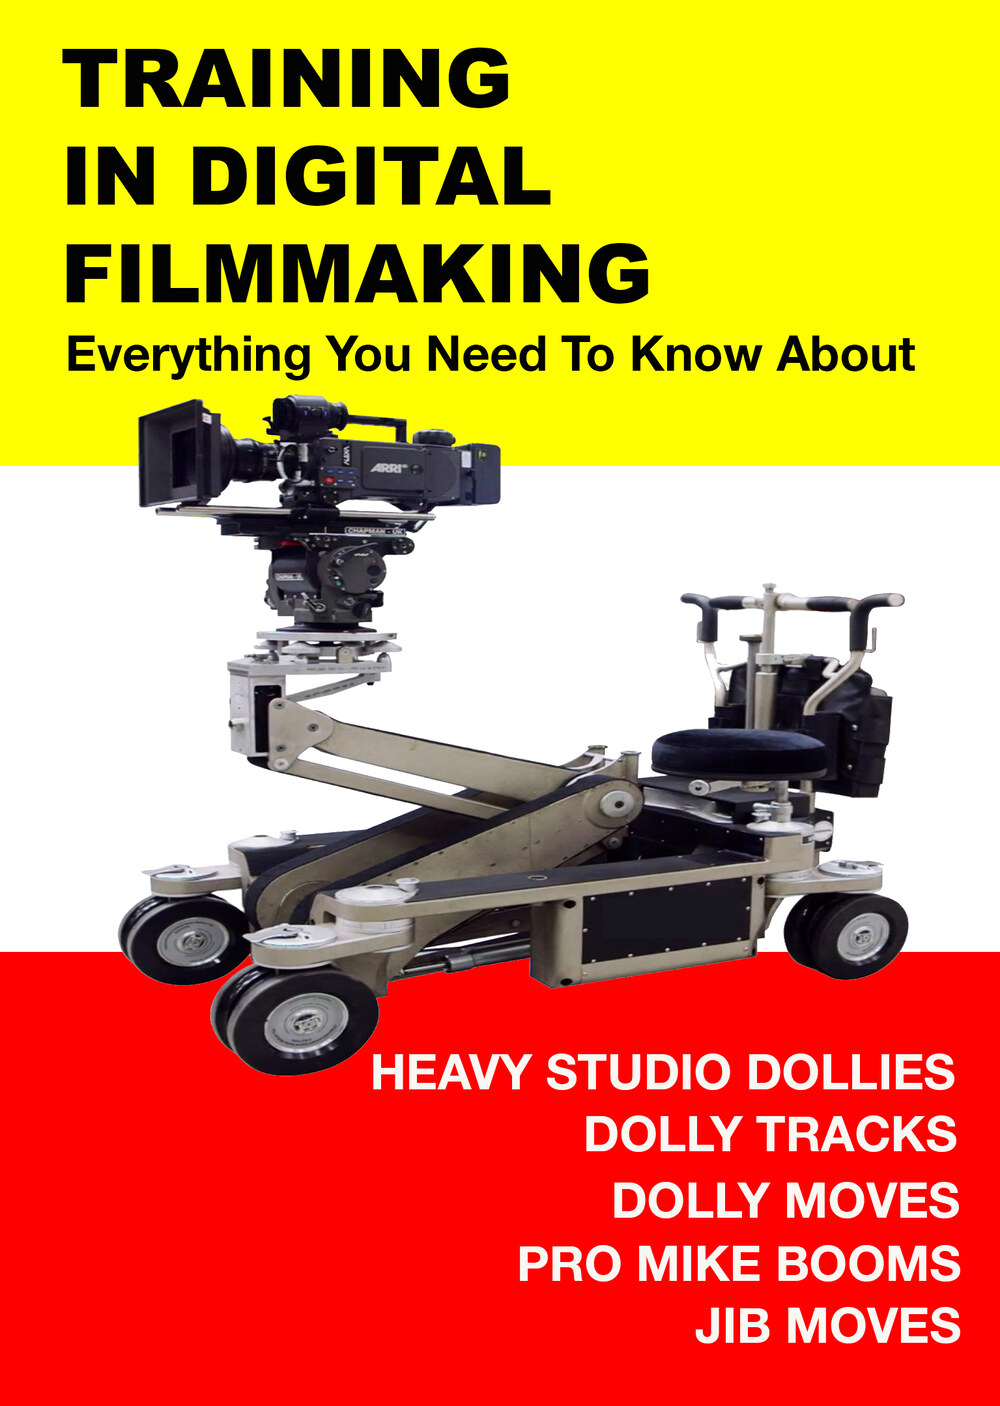 F3002 - Everything You Need to Know About Heavy Studio Dollies, Dolly Tracks, Dolly Moves Pro Mike Booms and Jib Moves